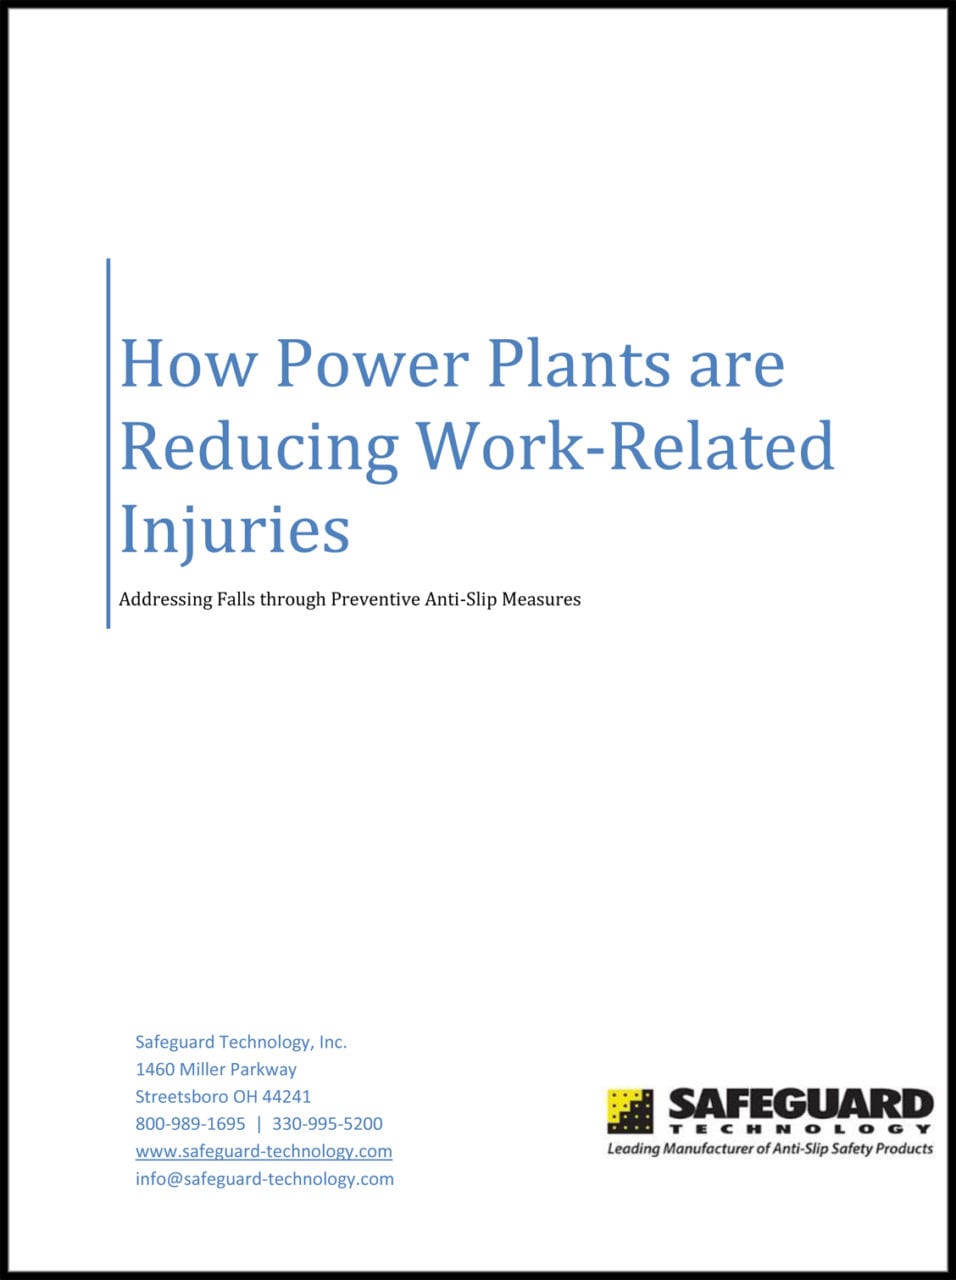 Safeguard Technology – How Power Plants are Reducing Work-Related Injuries